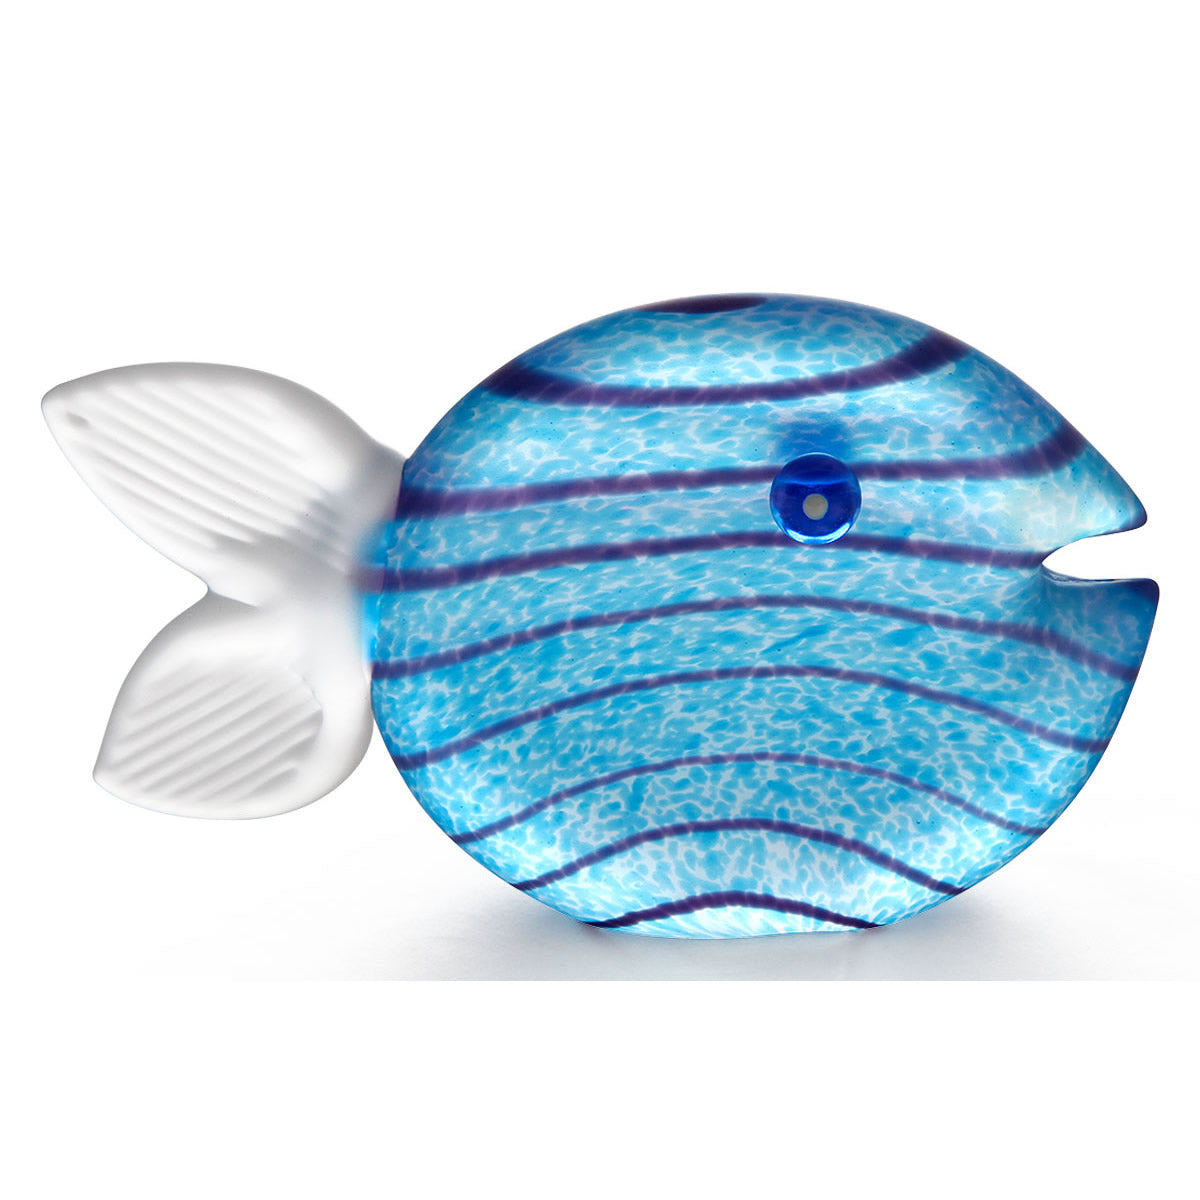 Snippy Fish Paperweight, Large/Light Blue- by Borowski